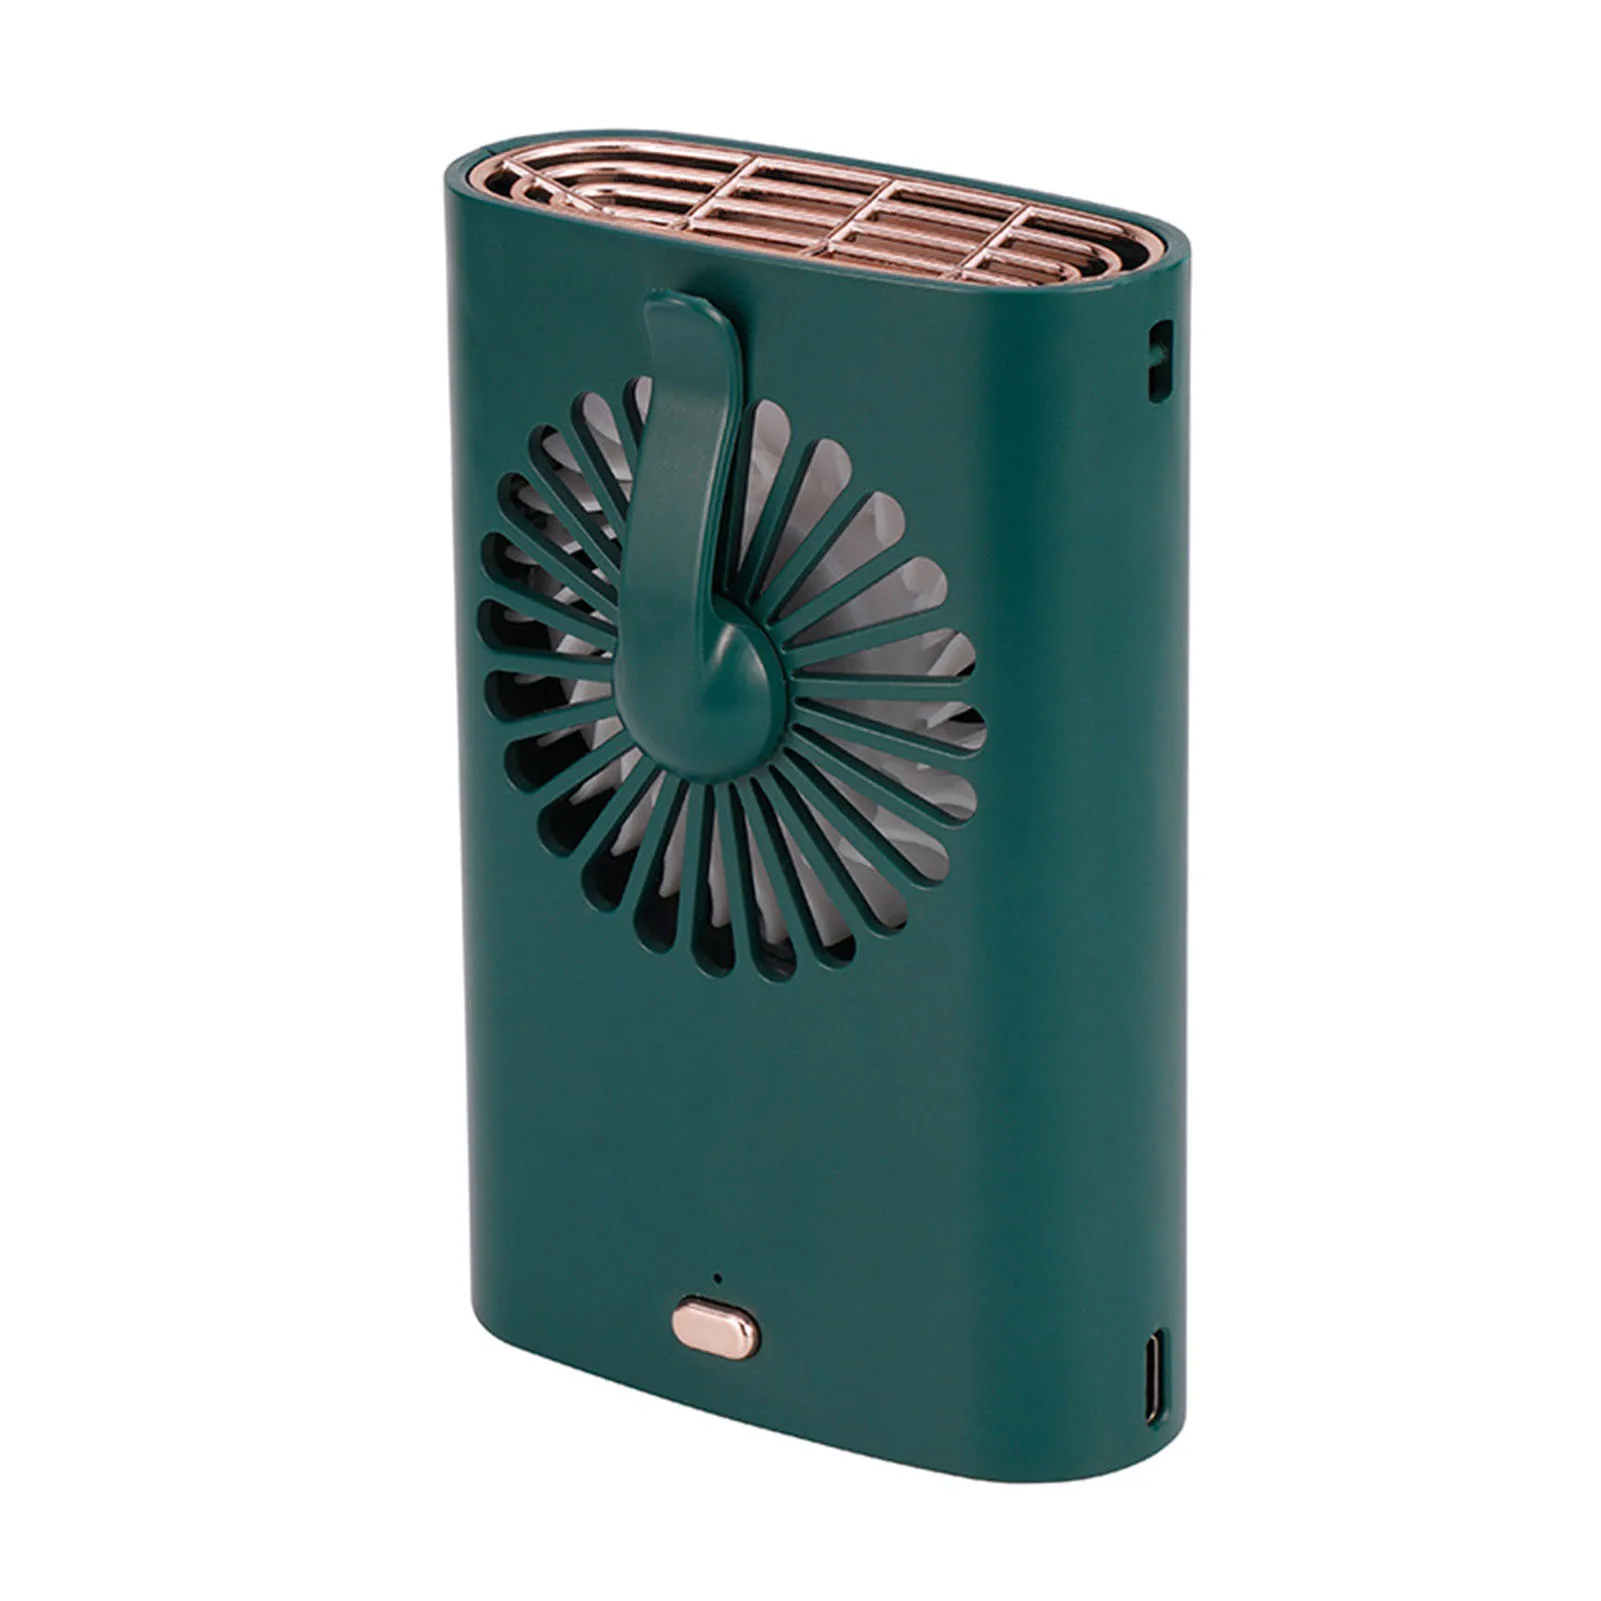 

Mini Fan With Clip Type-C Hanging Neck Cooler 1200mA Power Adjustable 3 Wind Speed Modes For Desk Waist